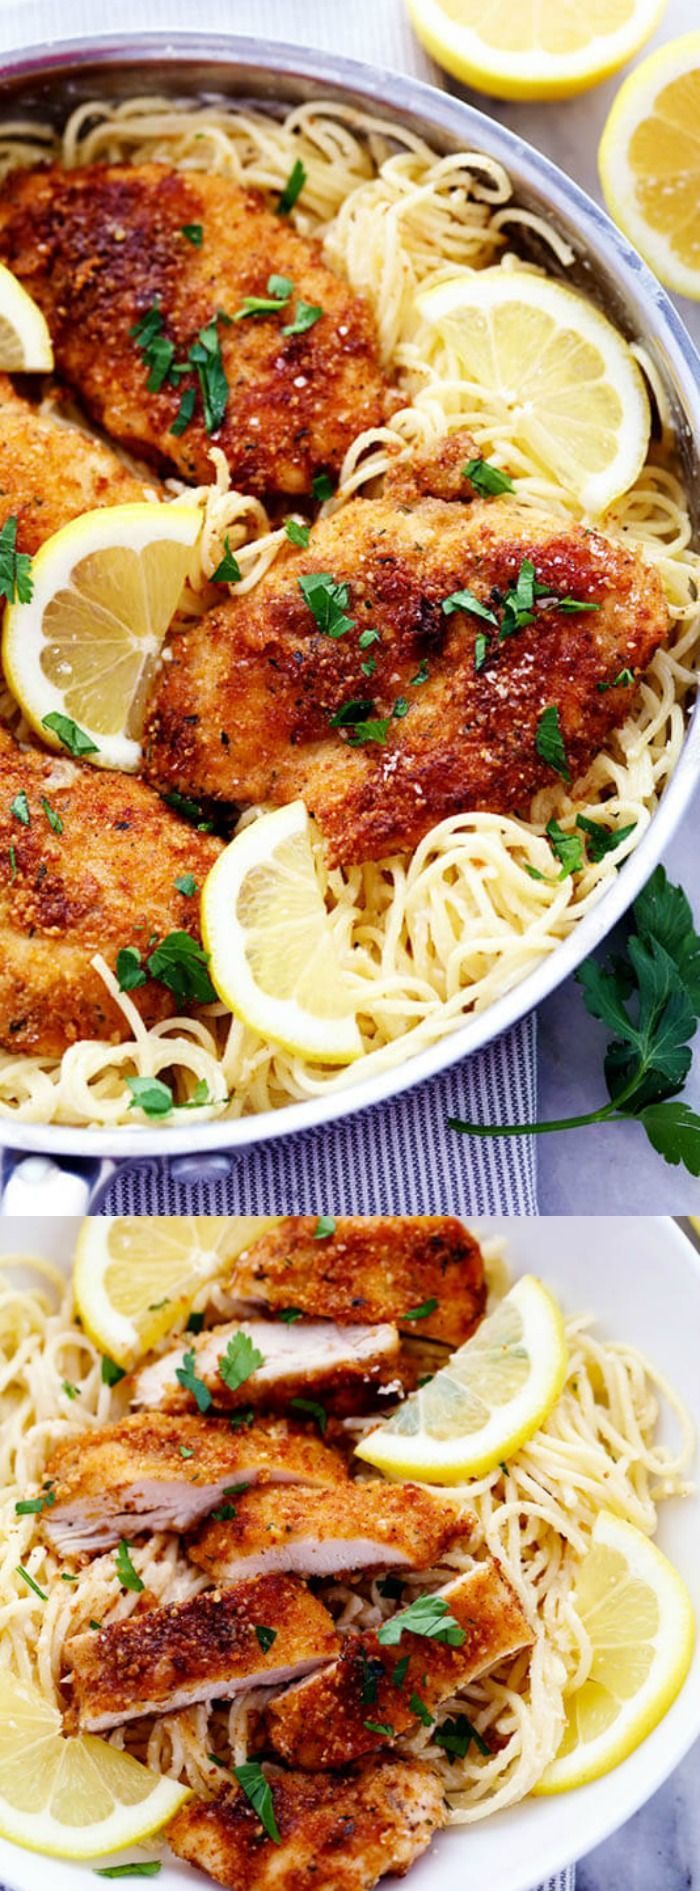 This Crispy Parmesan Chicken with Creamy Lemon Garlic Pasta from The Recipe Critic is just what your family wants for dinner this